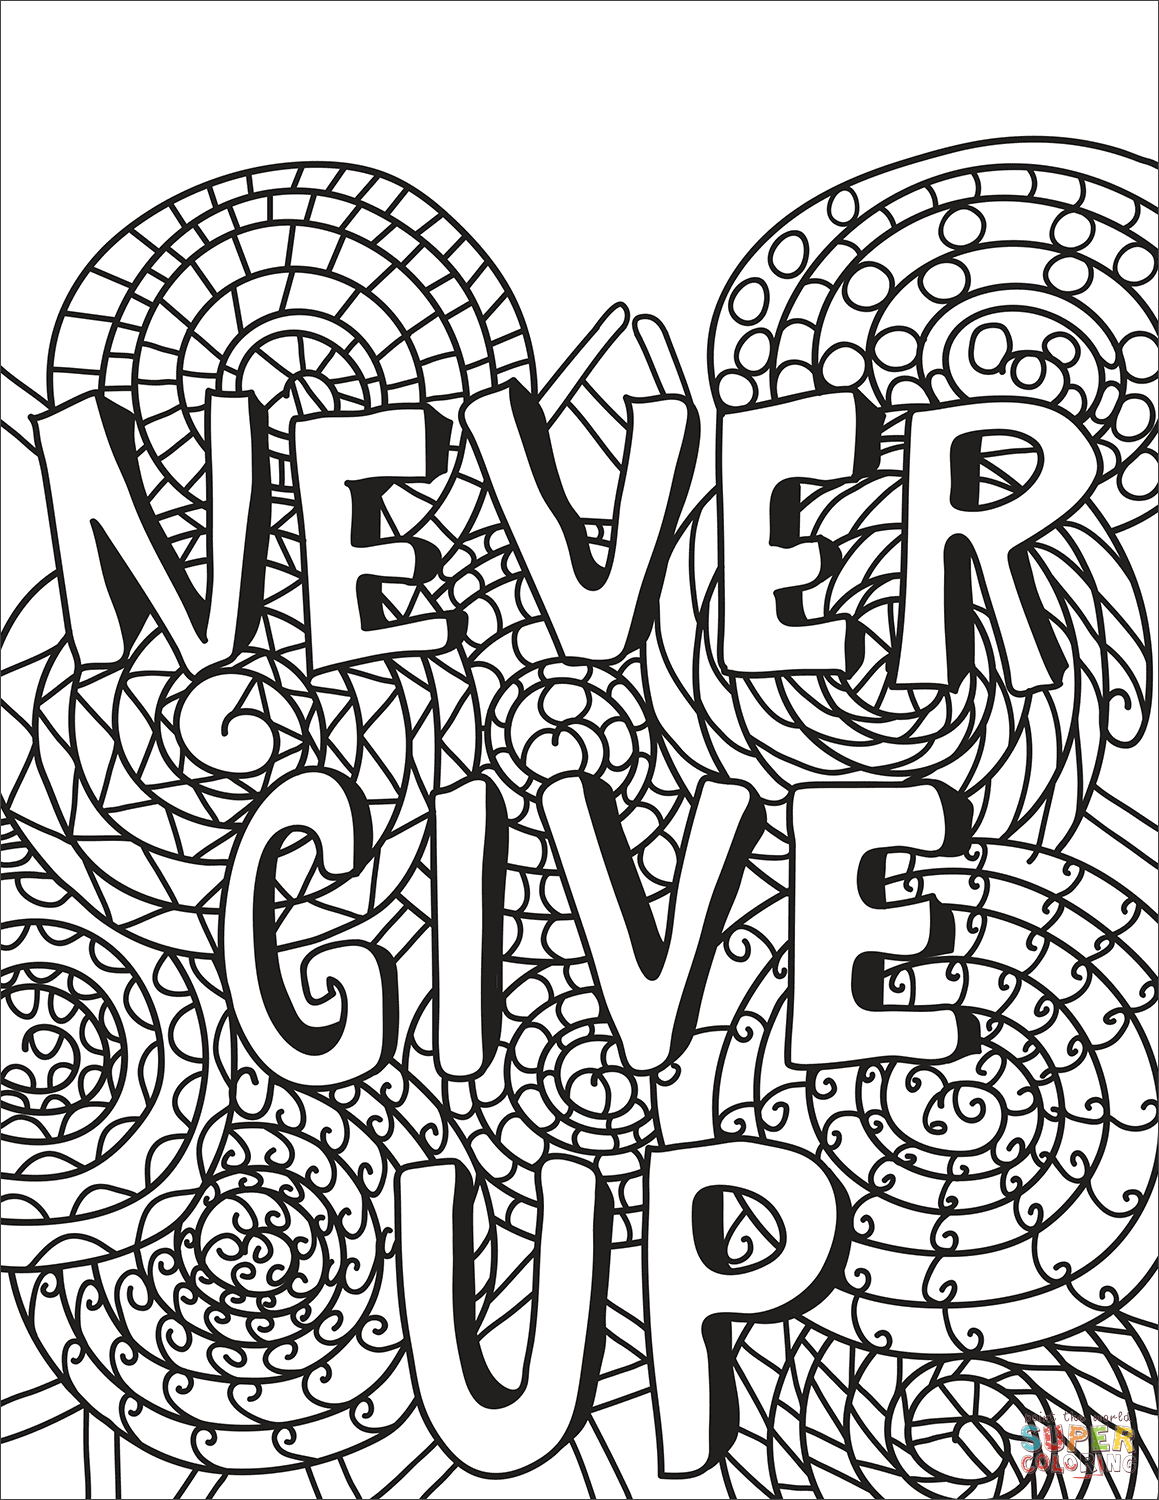 Never Give Up coloring page | Free Printable Coloring Pages